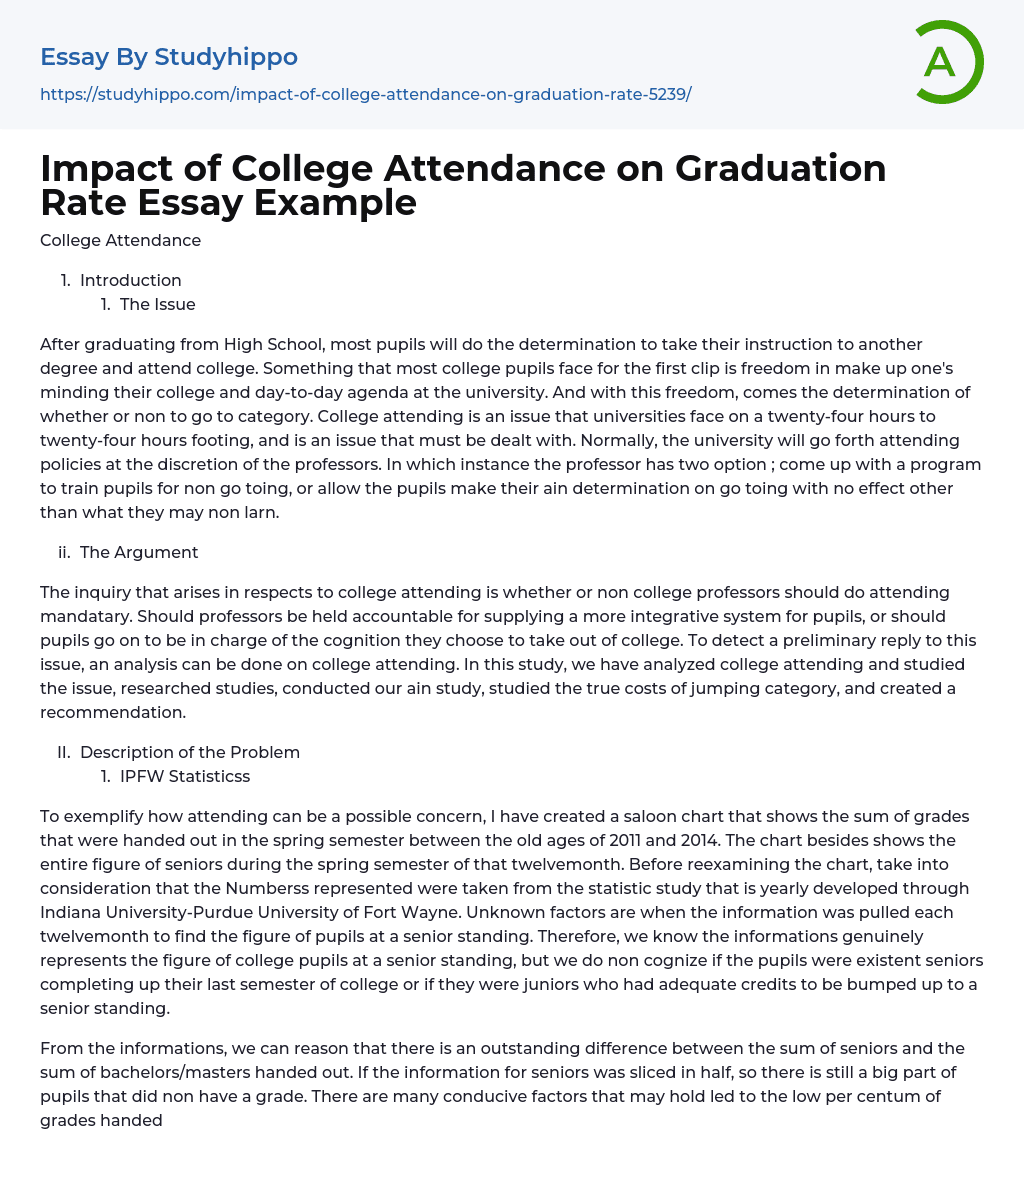 Impact of College Attendance on Graduation Rate Essay Example